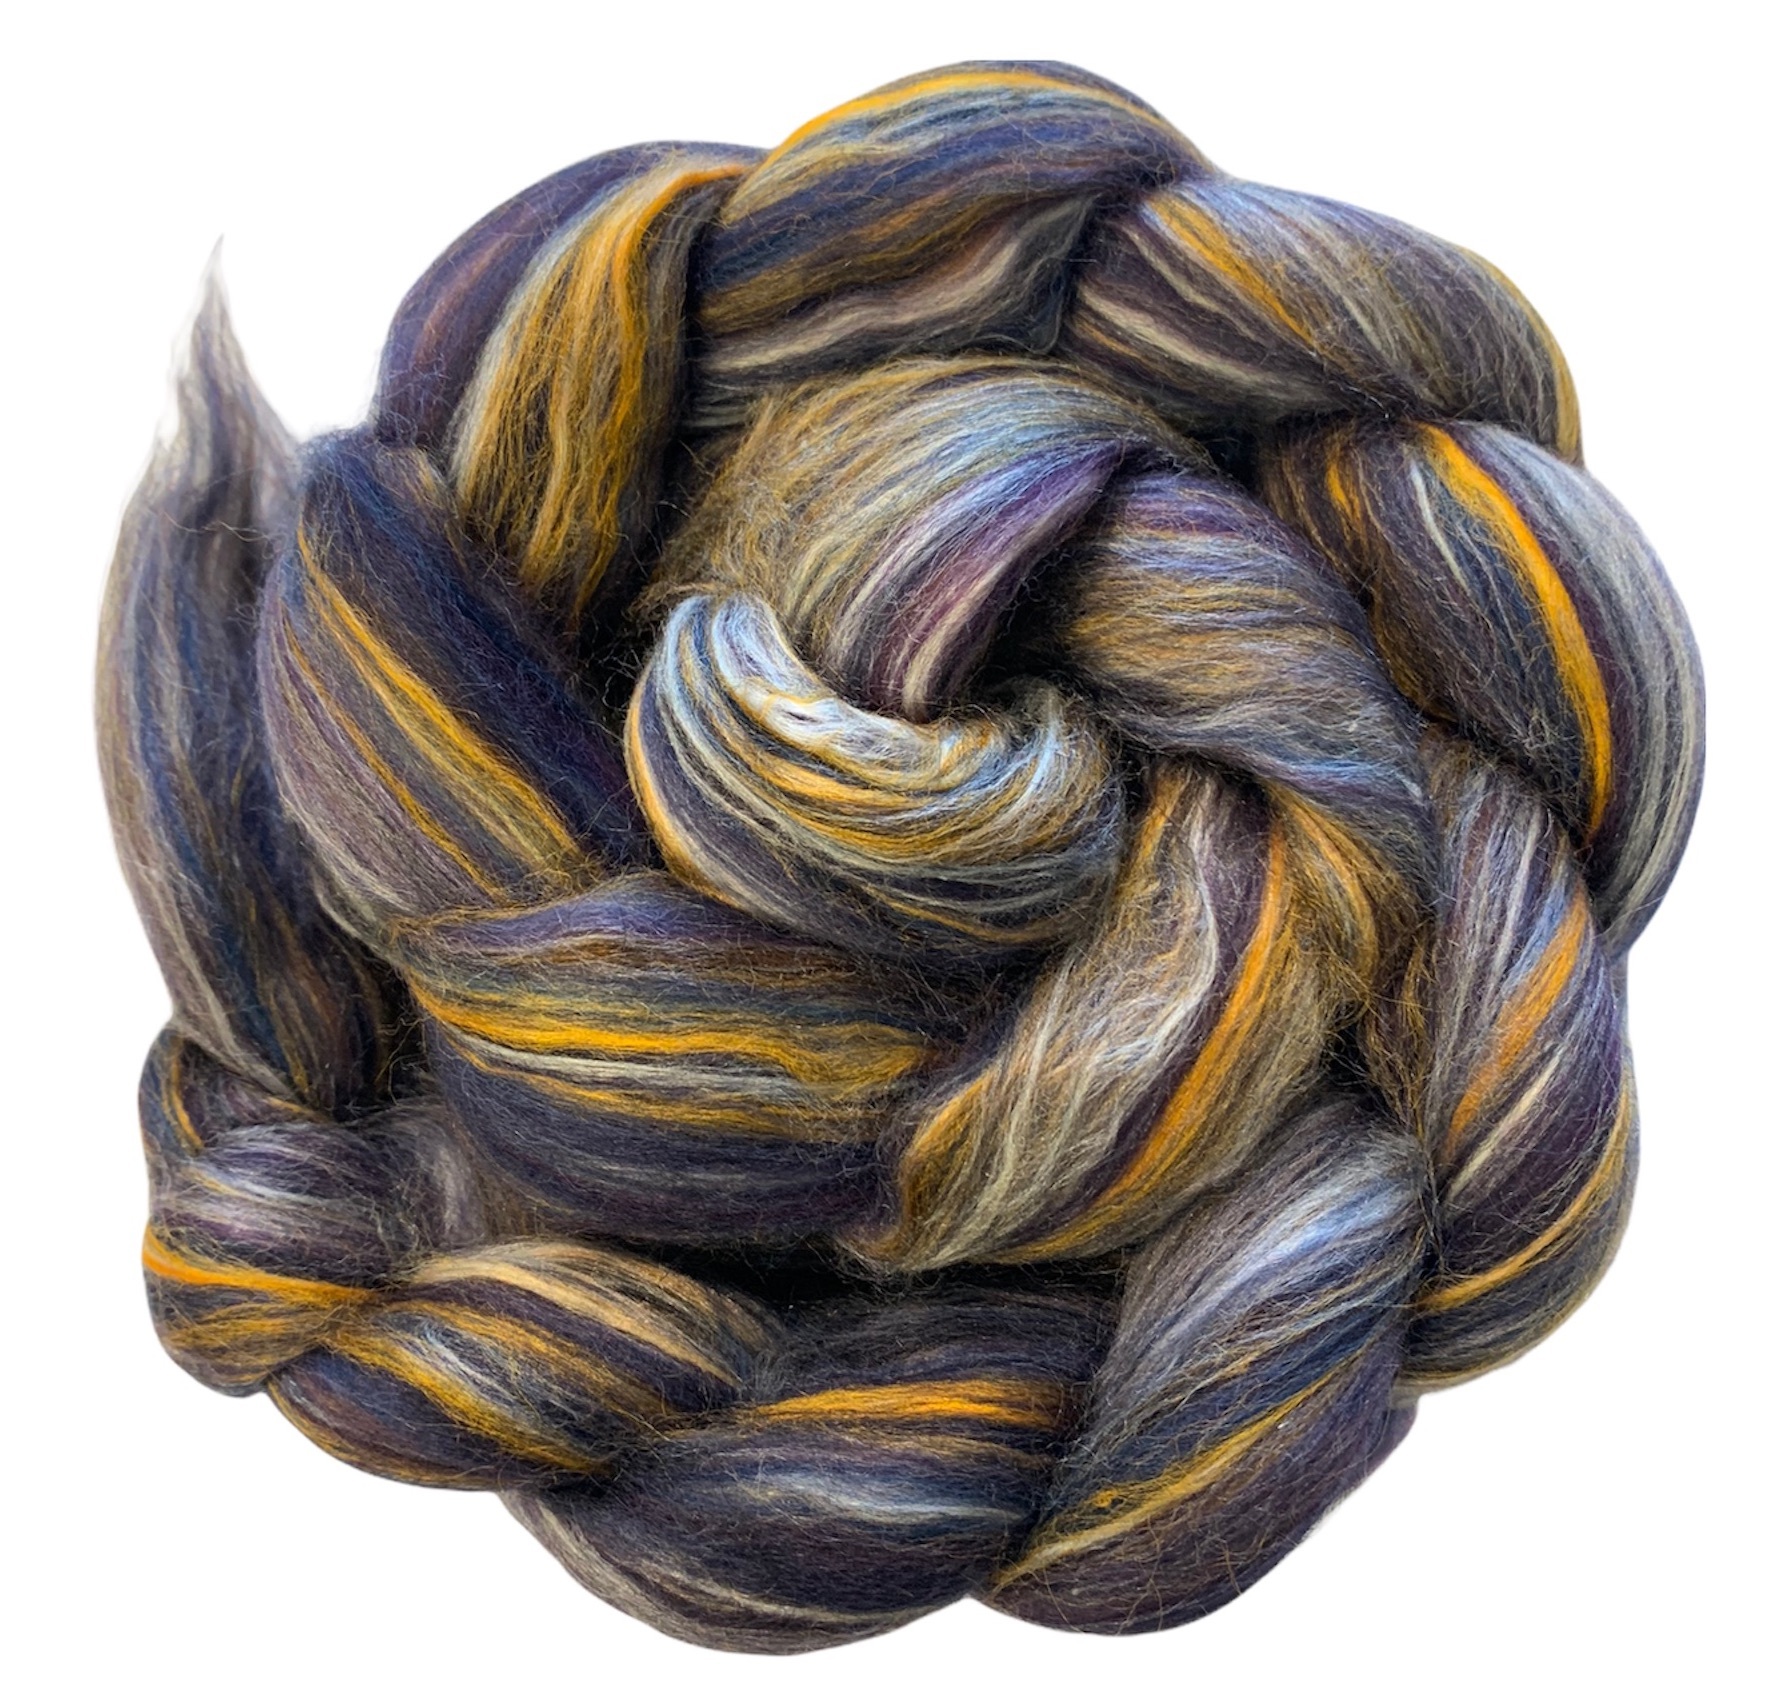 merino wool 75g sari silk and linen Mixed creative fibre pack for use with a blending board for spinning or felting